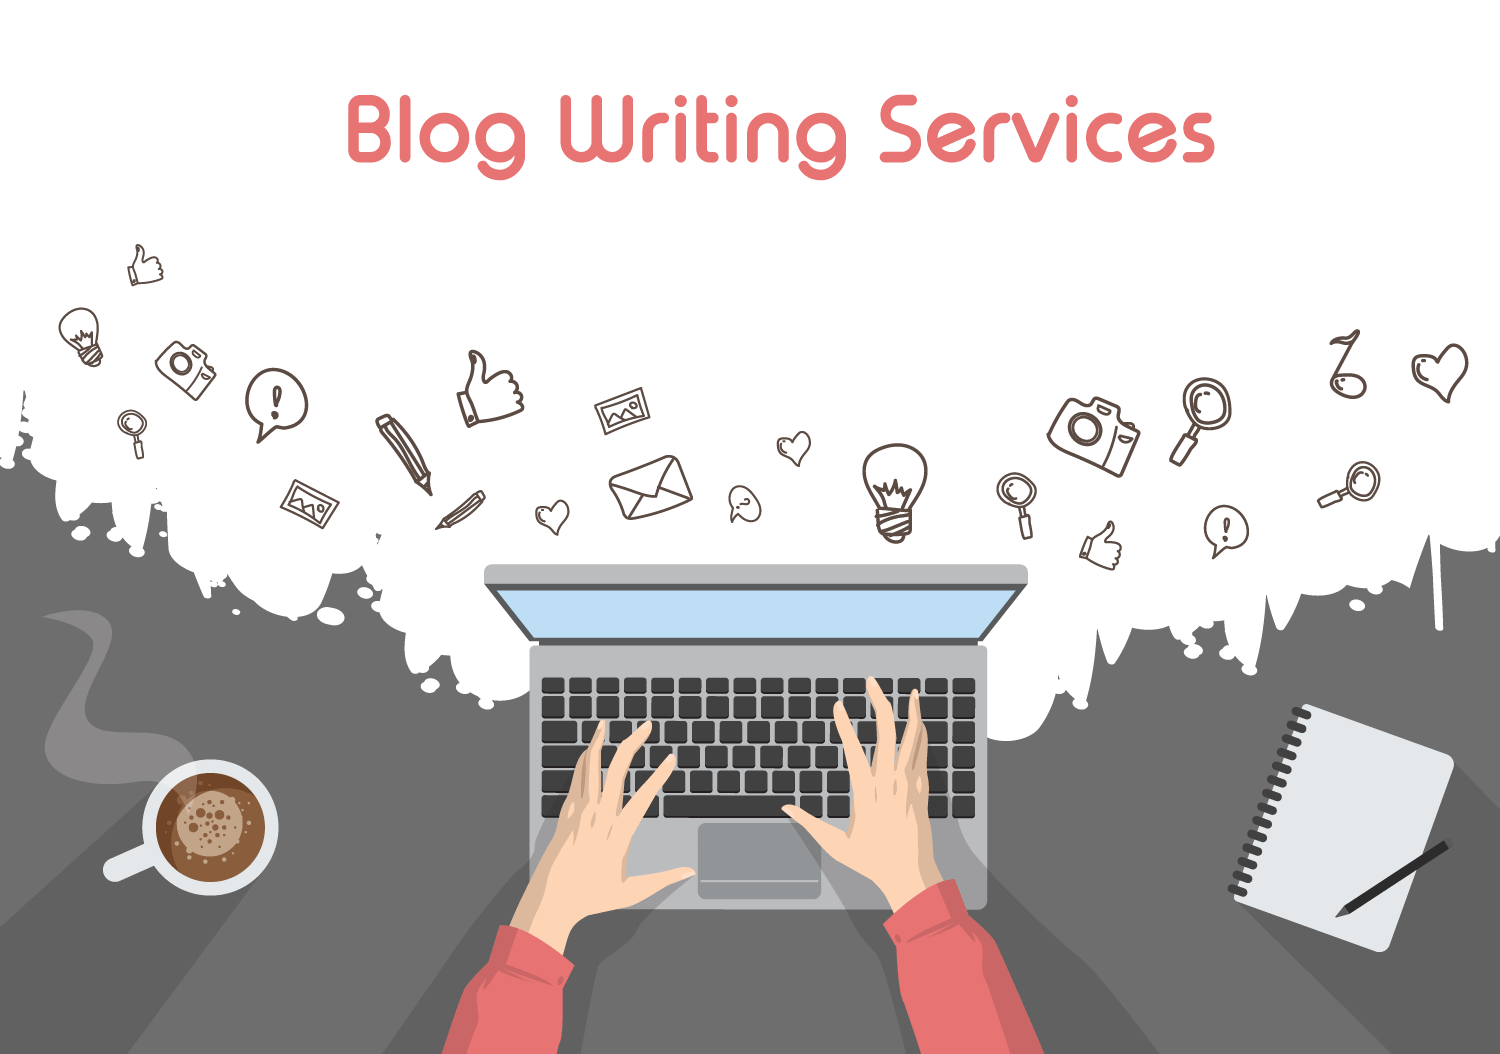 Keep Up With Content by Using Blog Writing Services